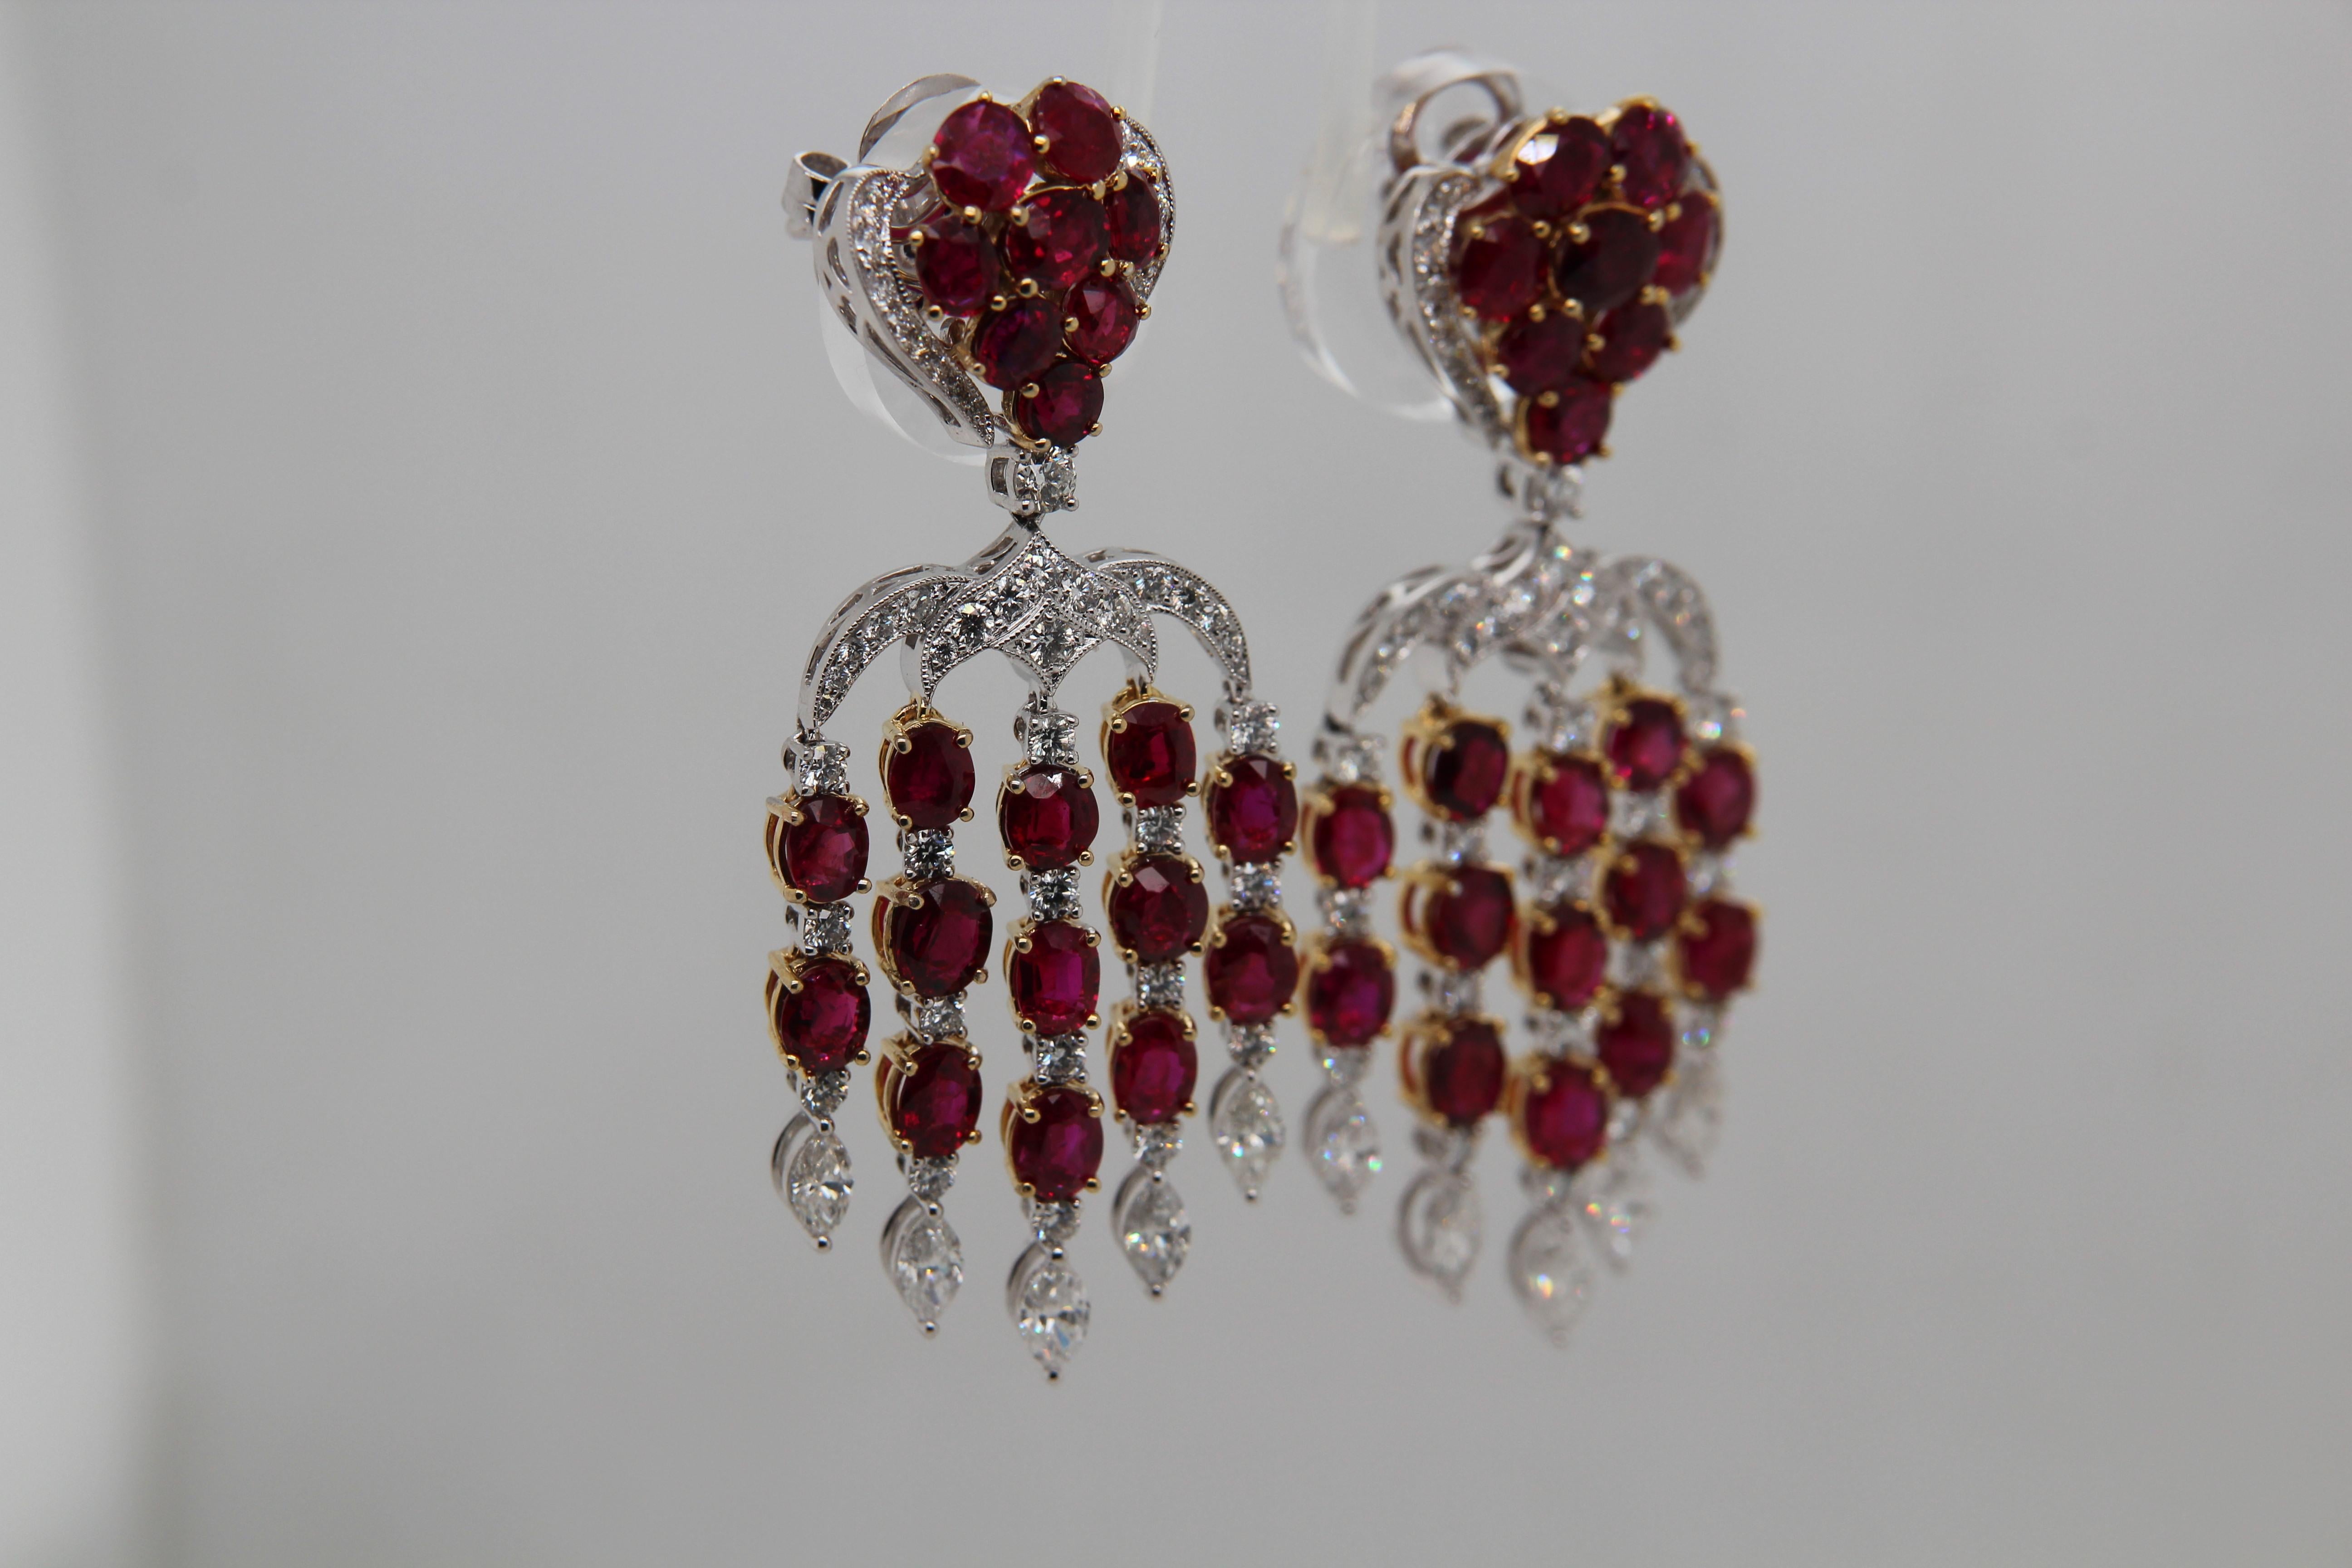 ICA certified 15.28 carat Burmese unheated rubies and diamond earrings in 18 karat gold. The forty two rubies weigh 15.28 carat certified by International Colored Gemstone Association (ICA) unheated and 'Pinkish red to Vivid red'. The diamond weigh